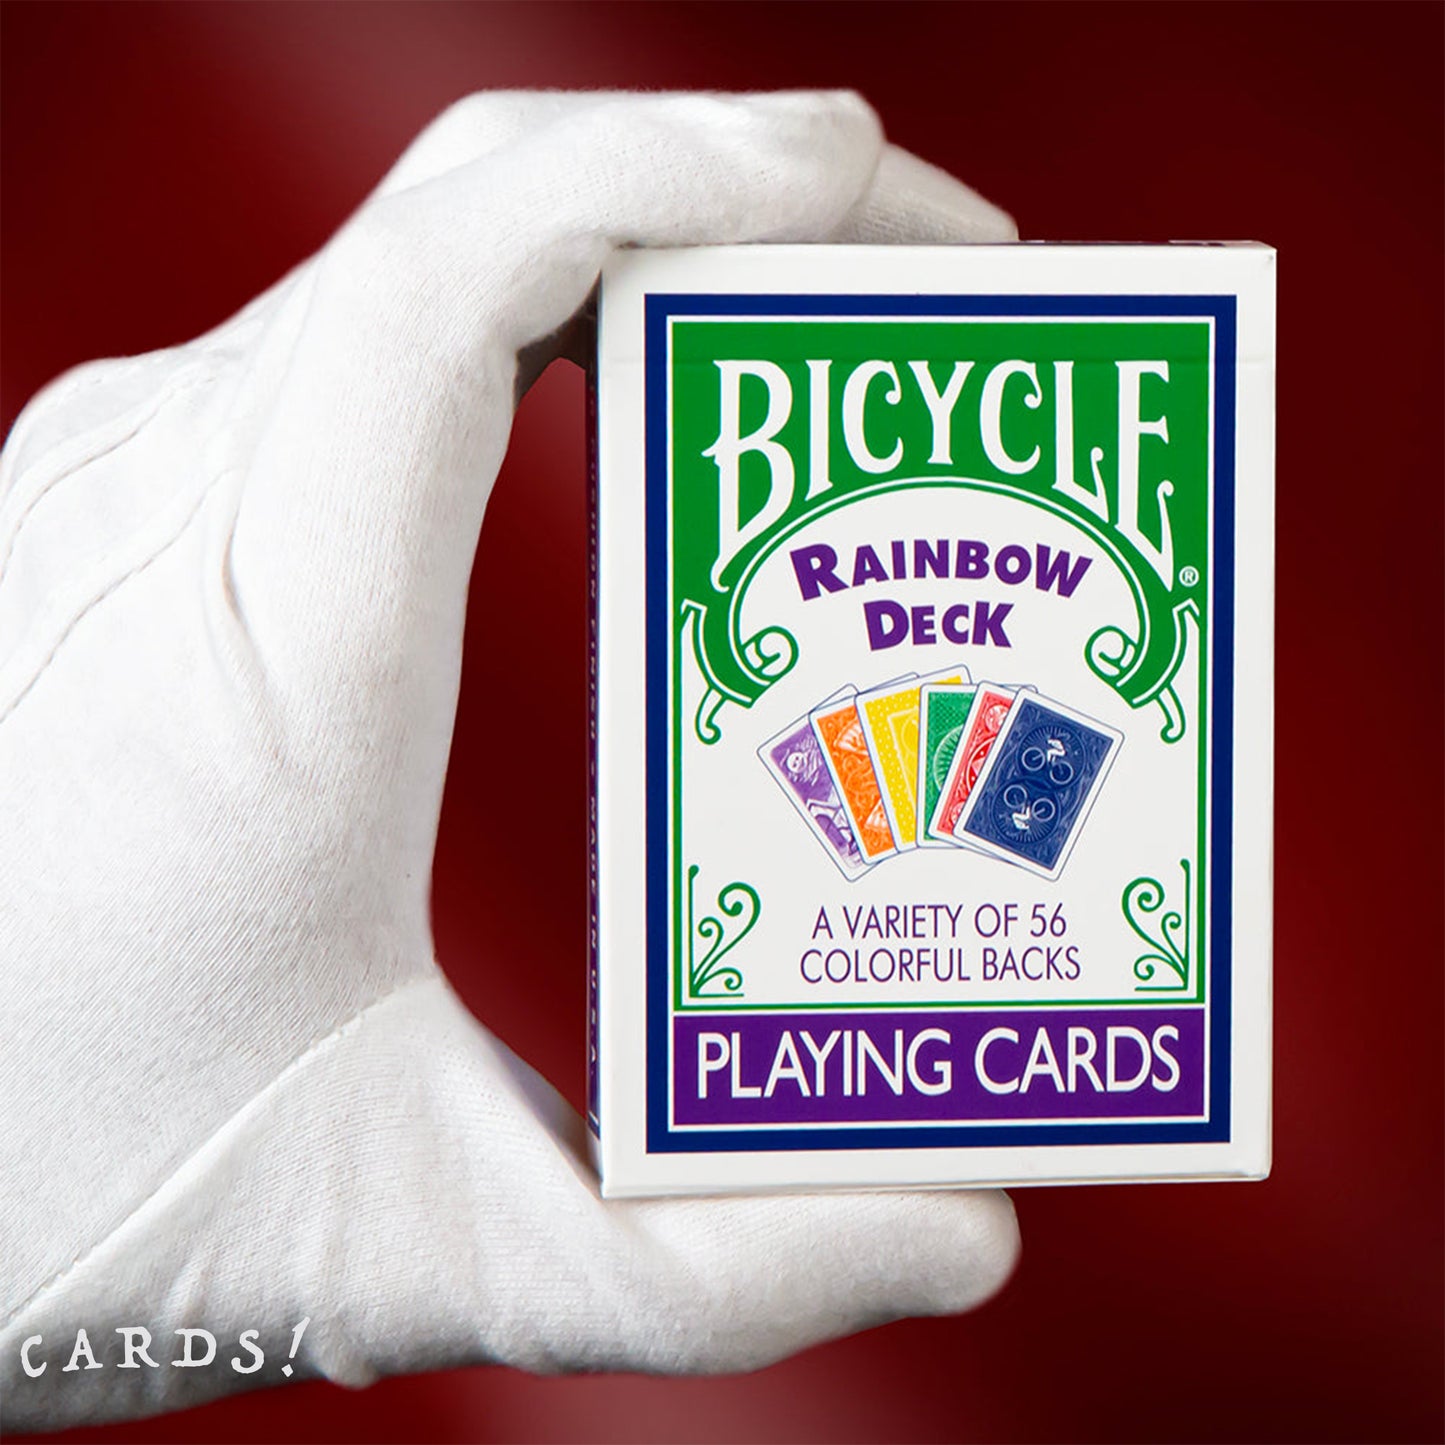 Bicycle® Rainbow Deck Playing Cards